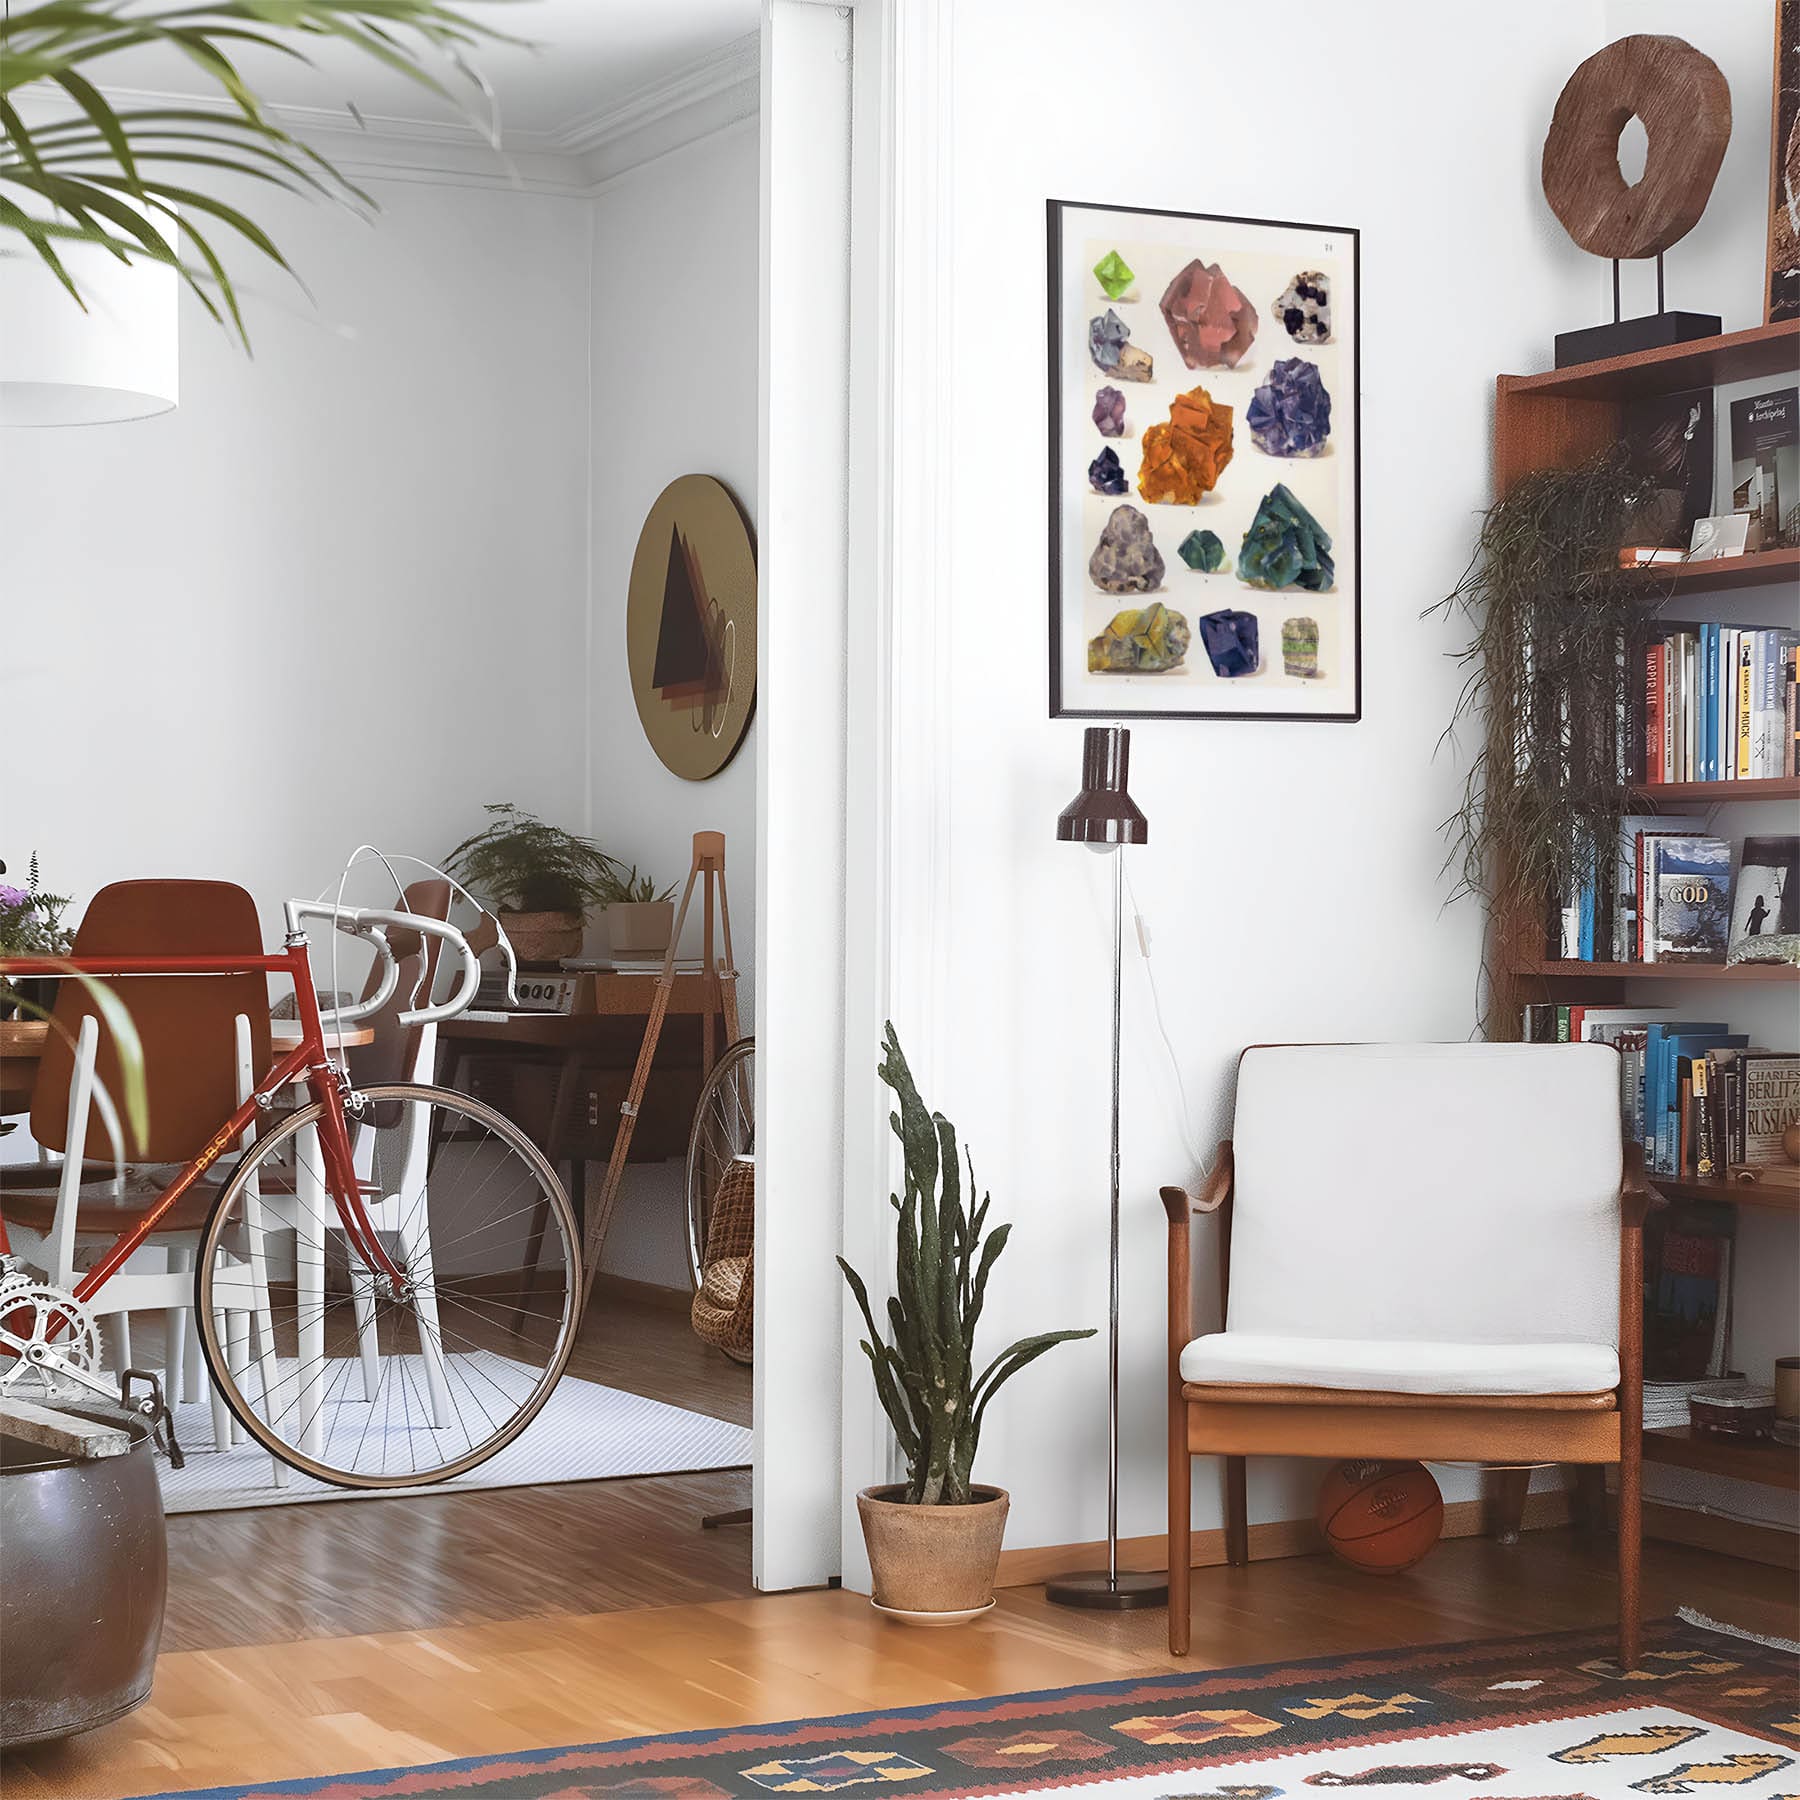 Eclectic living room with a road bike, bookshelf and house plants that features framed artwork of a Crystals and Rough Gems above a chair and lamp